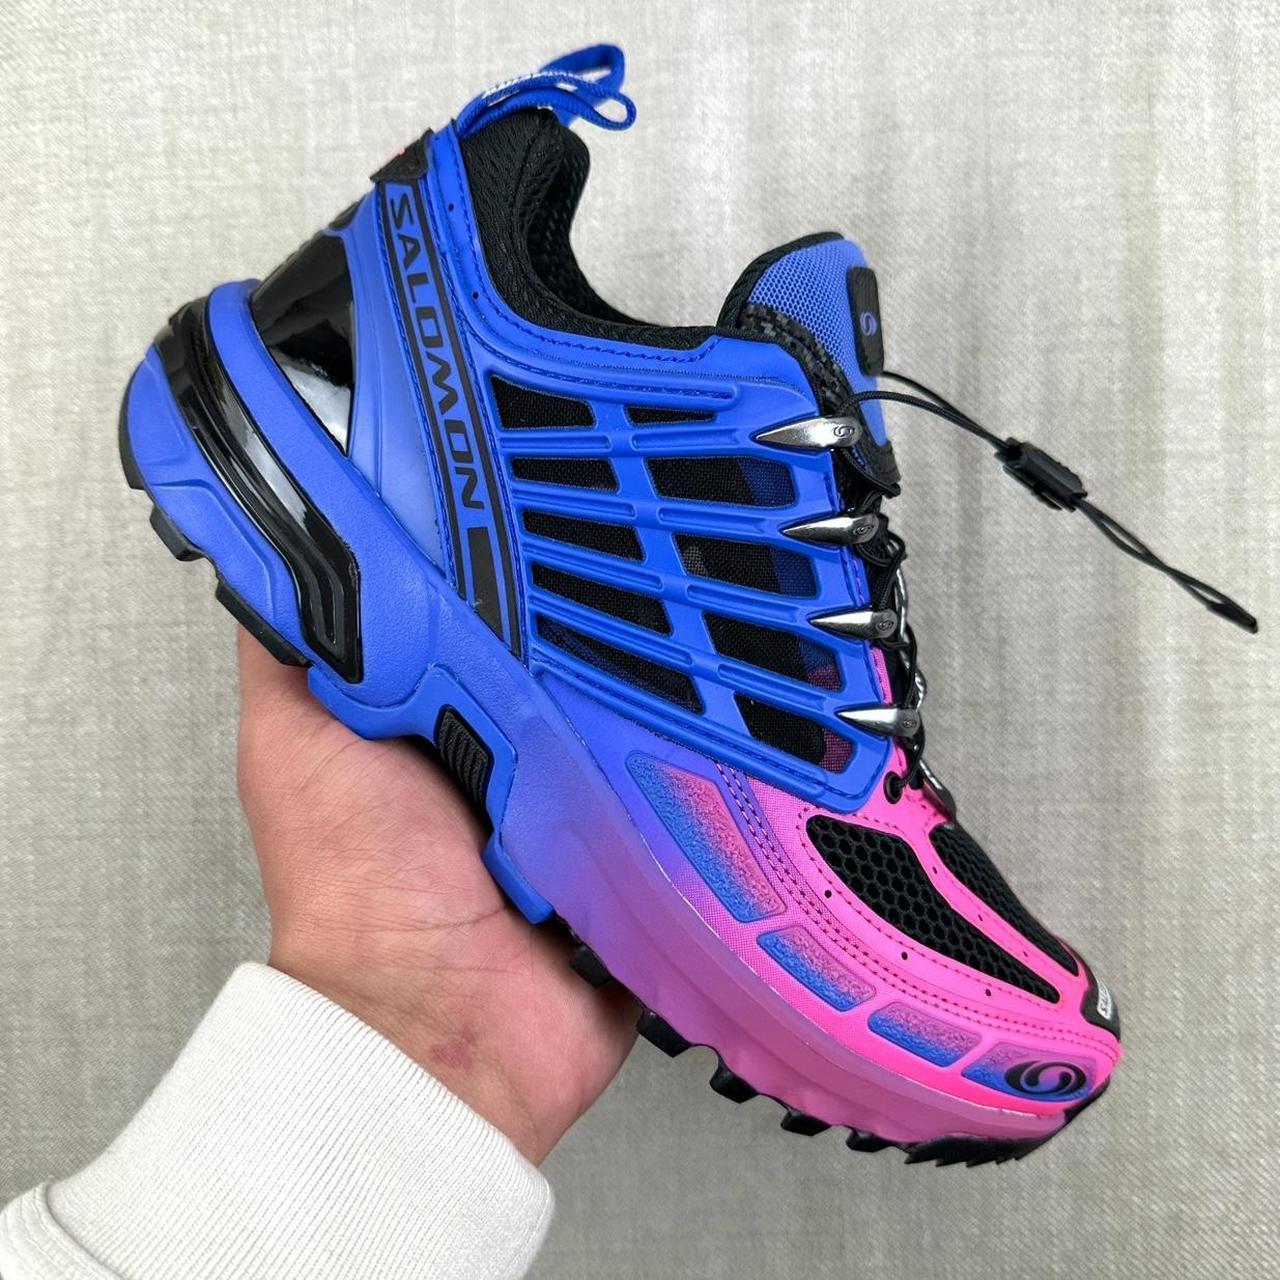 Salomon Women's Blue and Pink Trainers | Depop